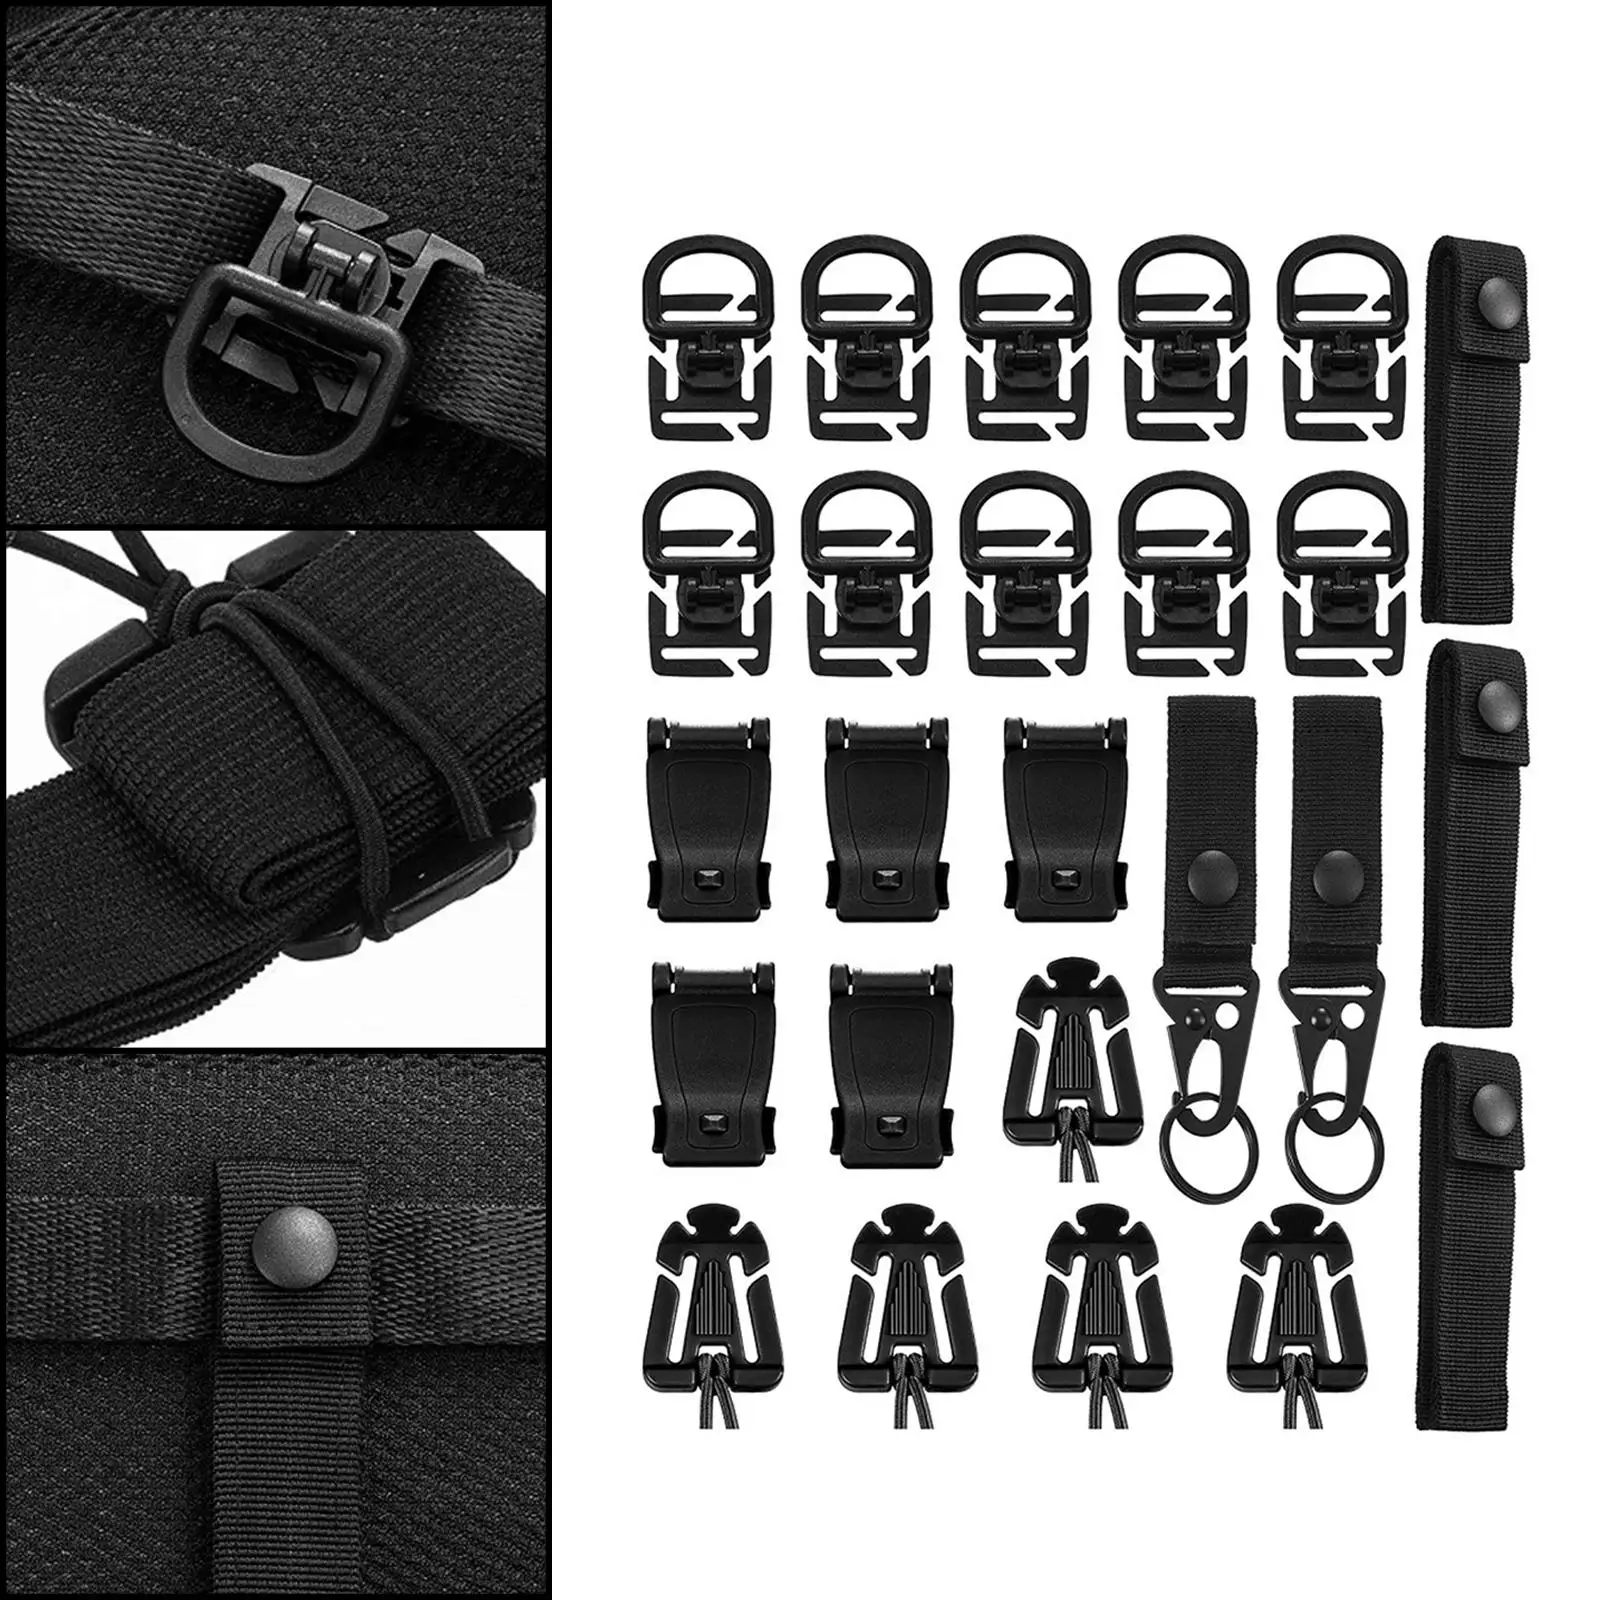 25Pcs Attachments for Tactical Molle Backpack Webbing Key Rings D-Ring Clips